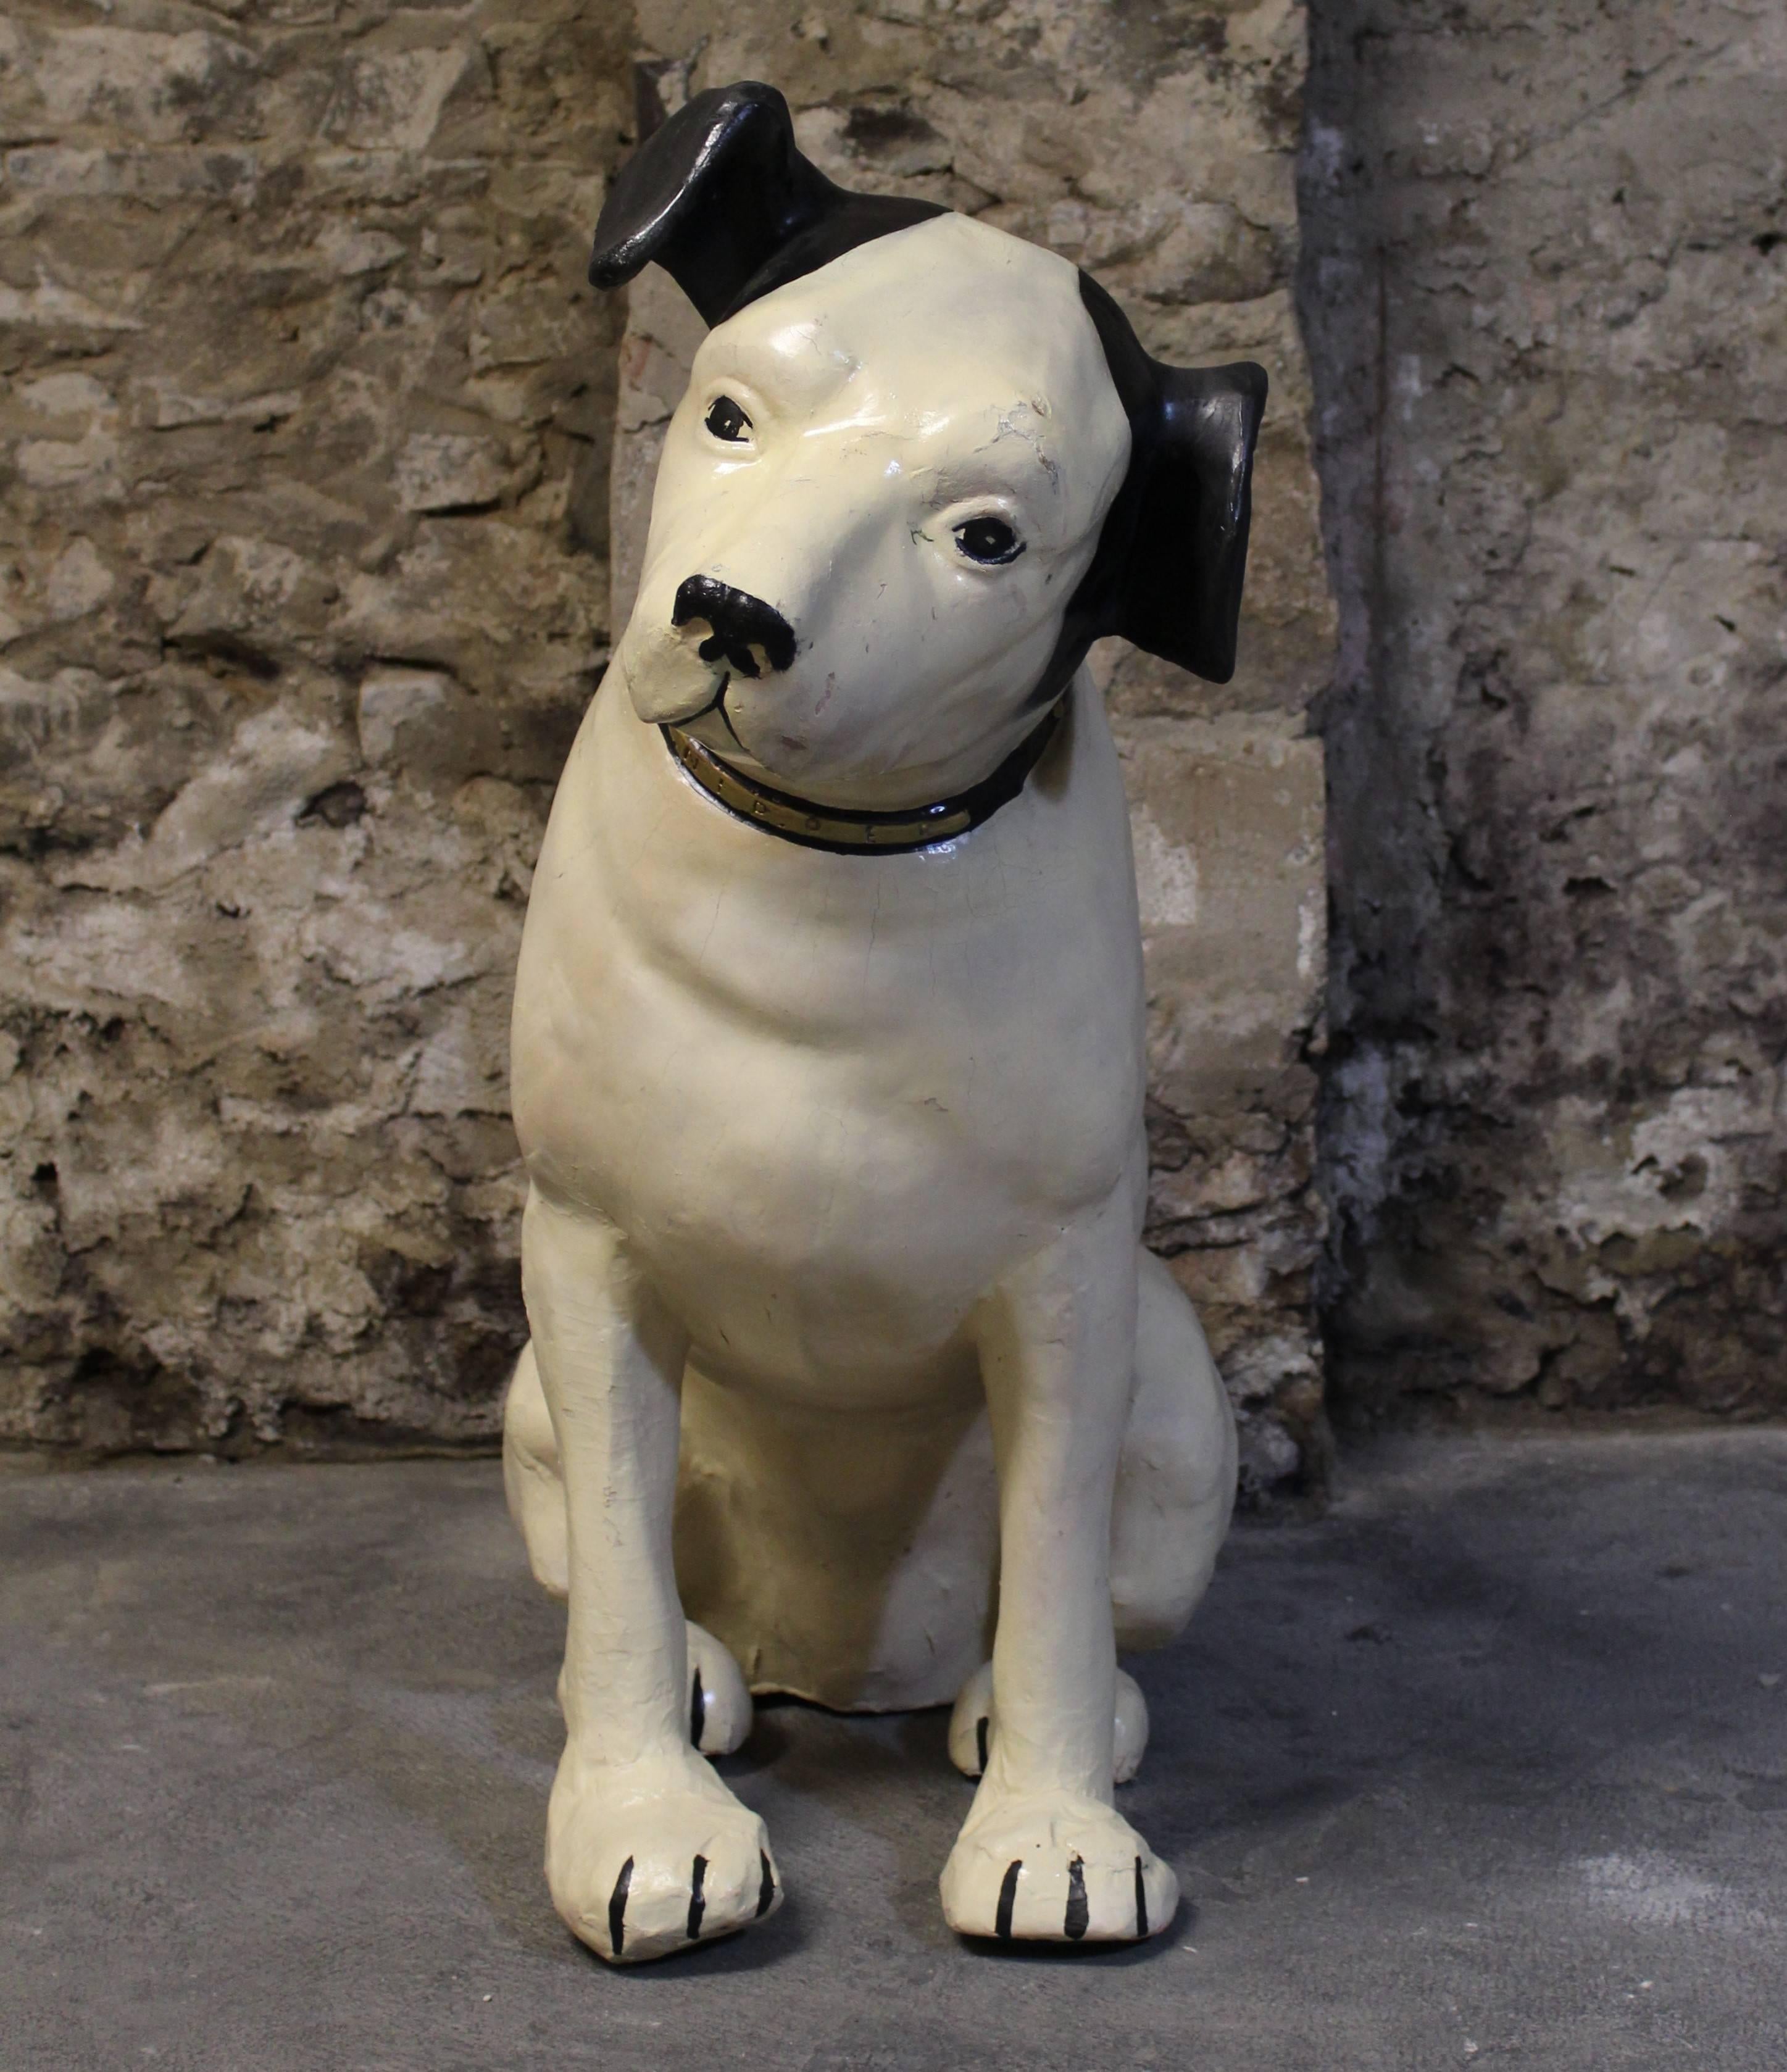 His Masters voice large store display 'Nipper' Dog by Old King Cole Papier-Mache Company of Canton, Ohio.
His Master's Voice (HMV) is a famous trademark in the music and recording industry and was the unofficial name of a major British record label.